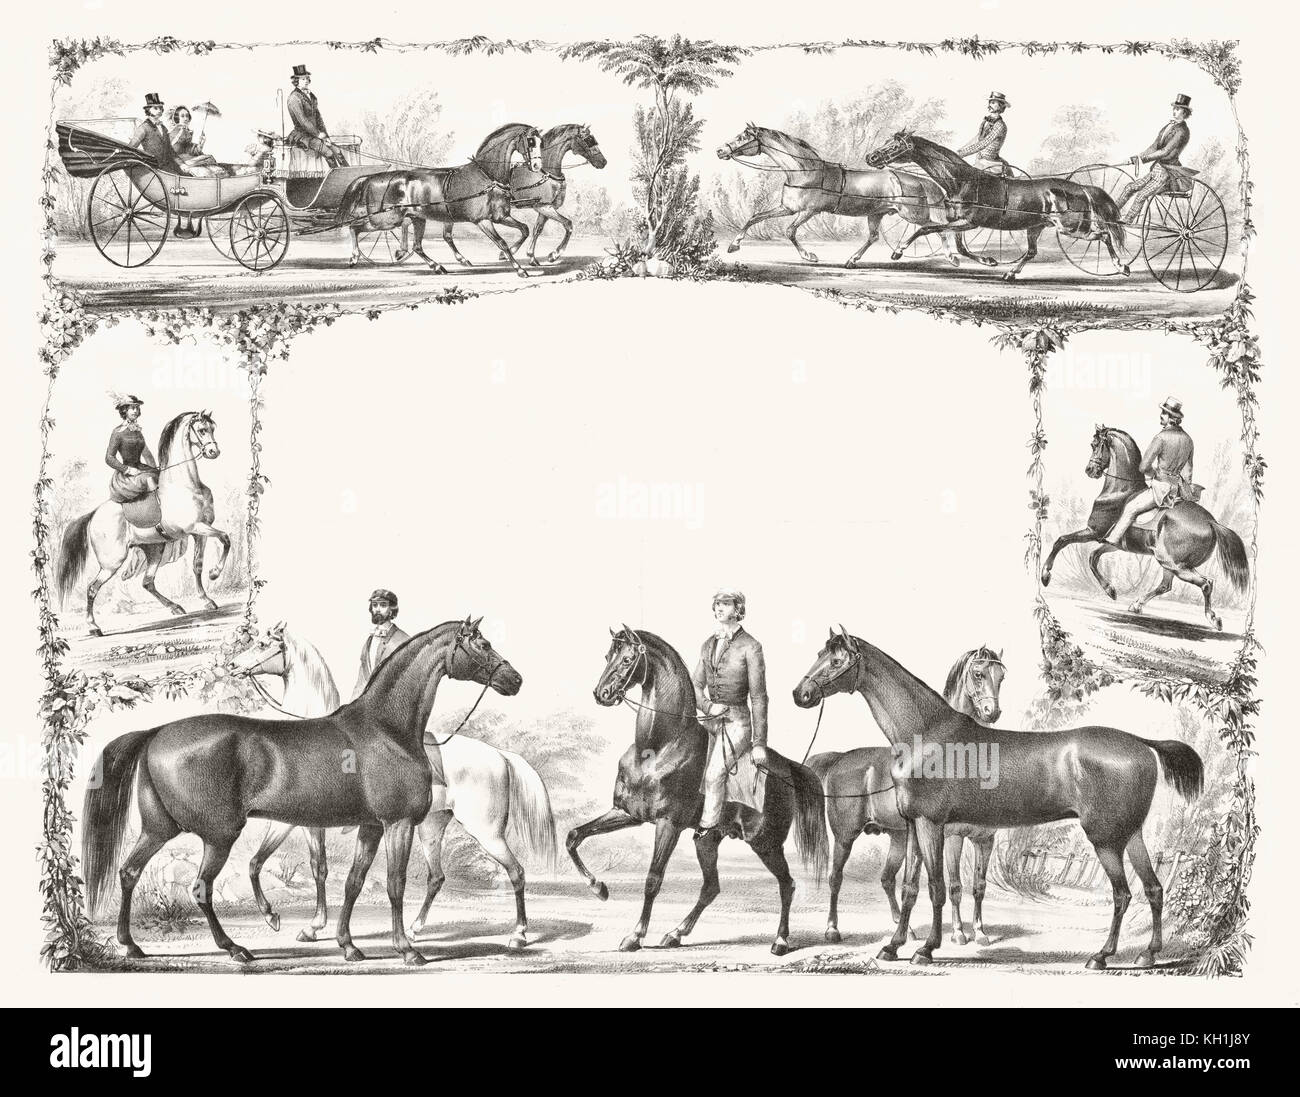 Old livery card framed by riding decorations. By unidentified author, publ. in Cincinnati, 1861 Stock Photo